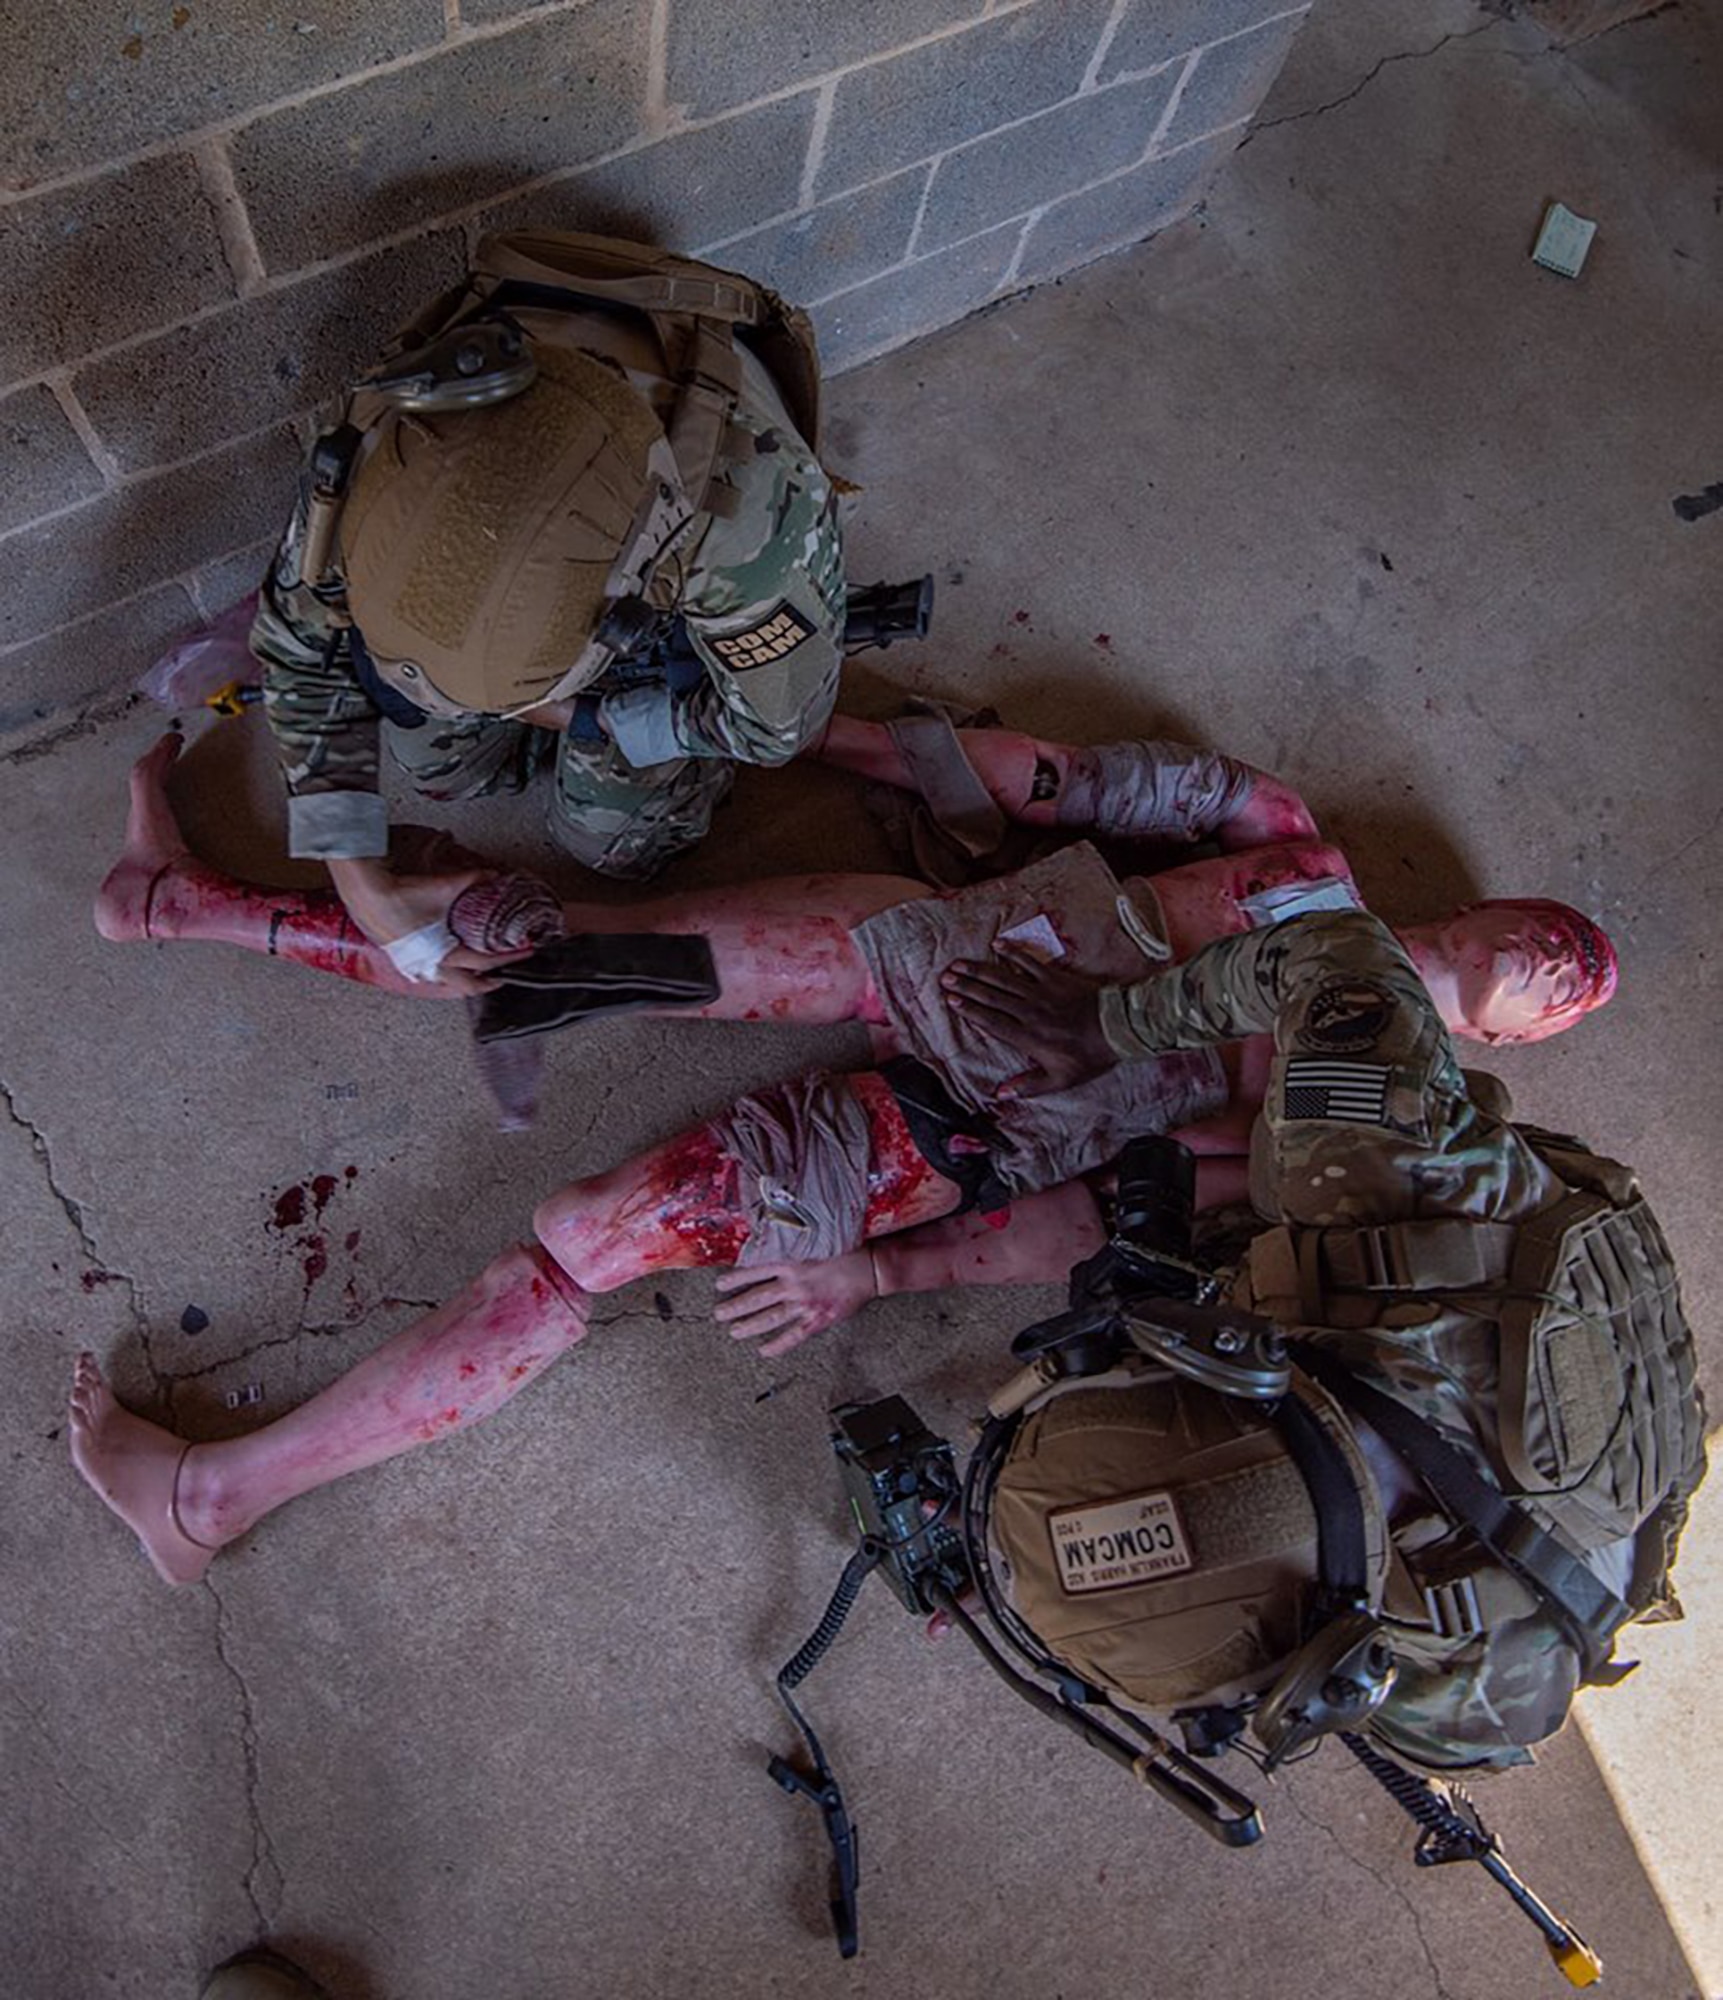 Senior Airman Maygan Straight (top), and Airman 1st Class Franklin Harris, both assigned to 1st Combat Camera Squadron, treat a simulated casualty during the Urban Warfare Simulation lane of the 2018 Hilda I. Clayton Best Combat Camera Competition at Marine Corps Base Quantico, Va., May 2, 2018. The competition is an annual event open to all branches of the military, it's hosted by the 55th Signal Company (Combat Camera) in order to test the technical and tactical proficiencies of Defense Department combat photographers. (U.S. Army photo by Staff Sgt. Pablo N. Piedra)